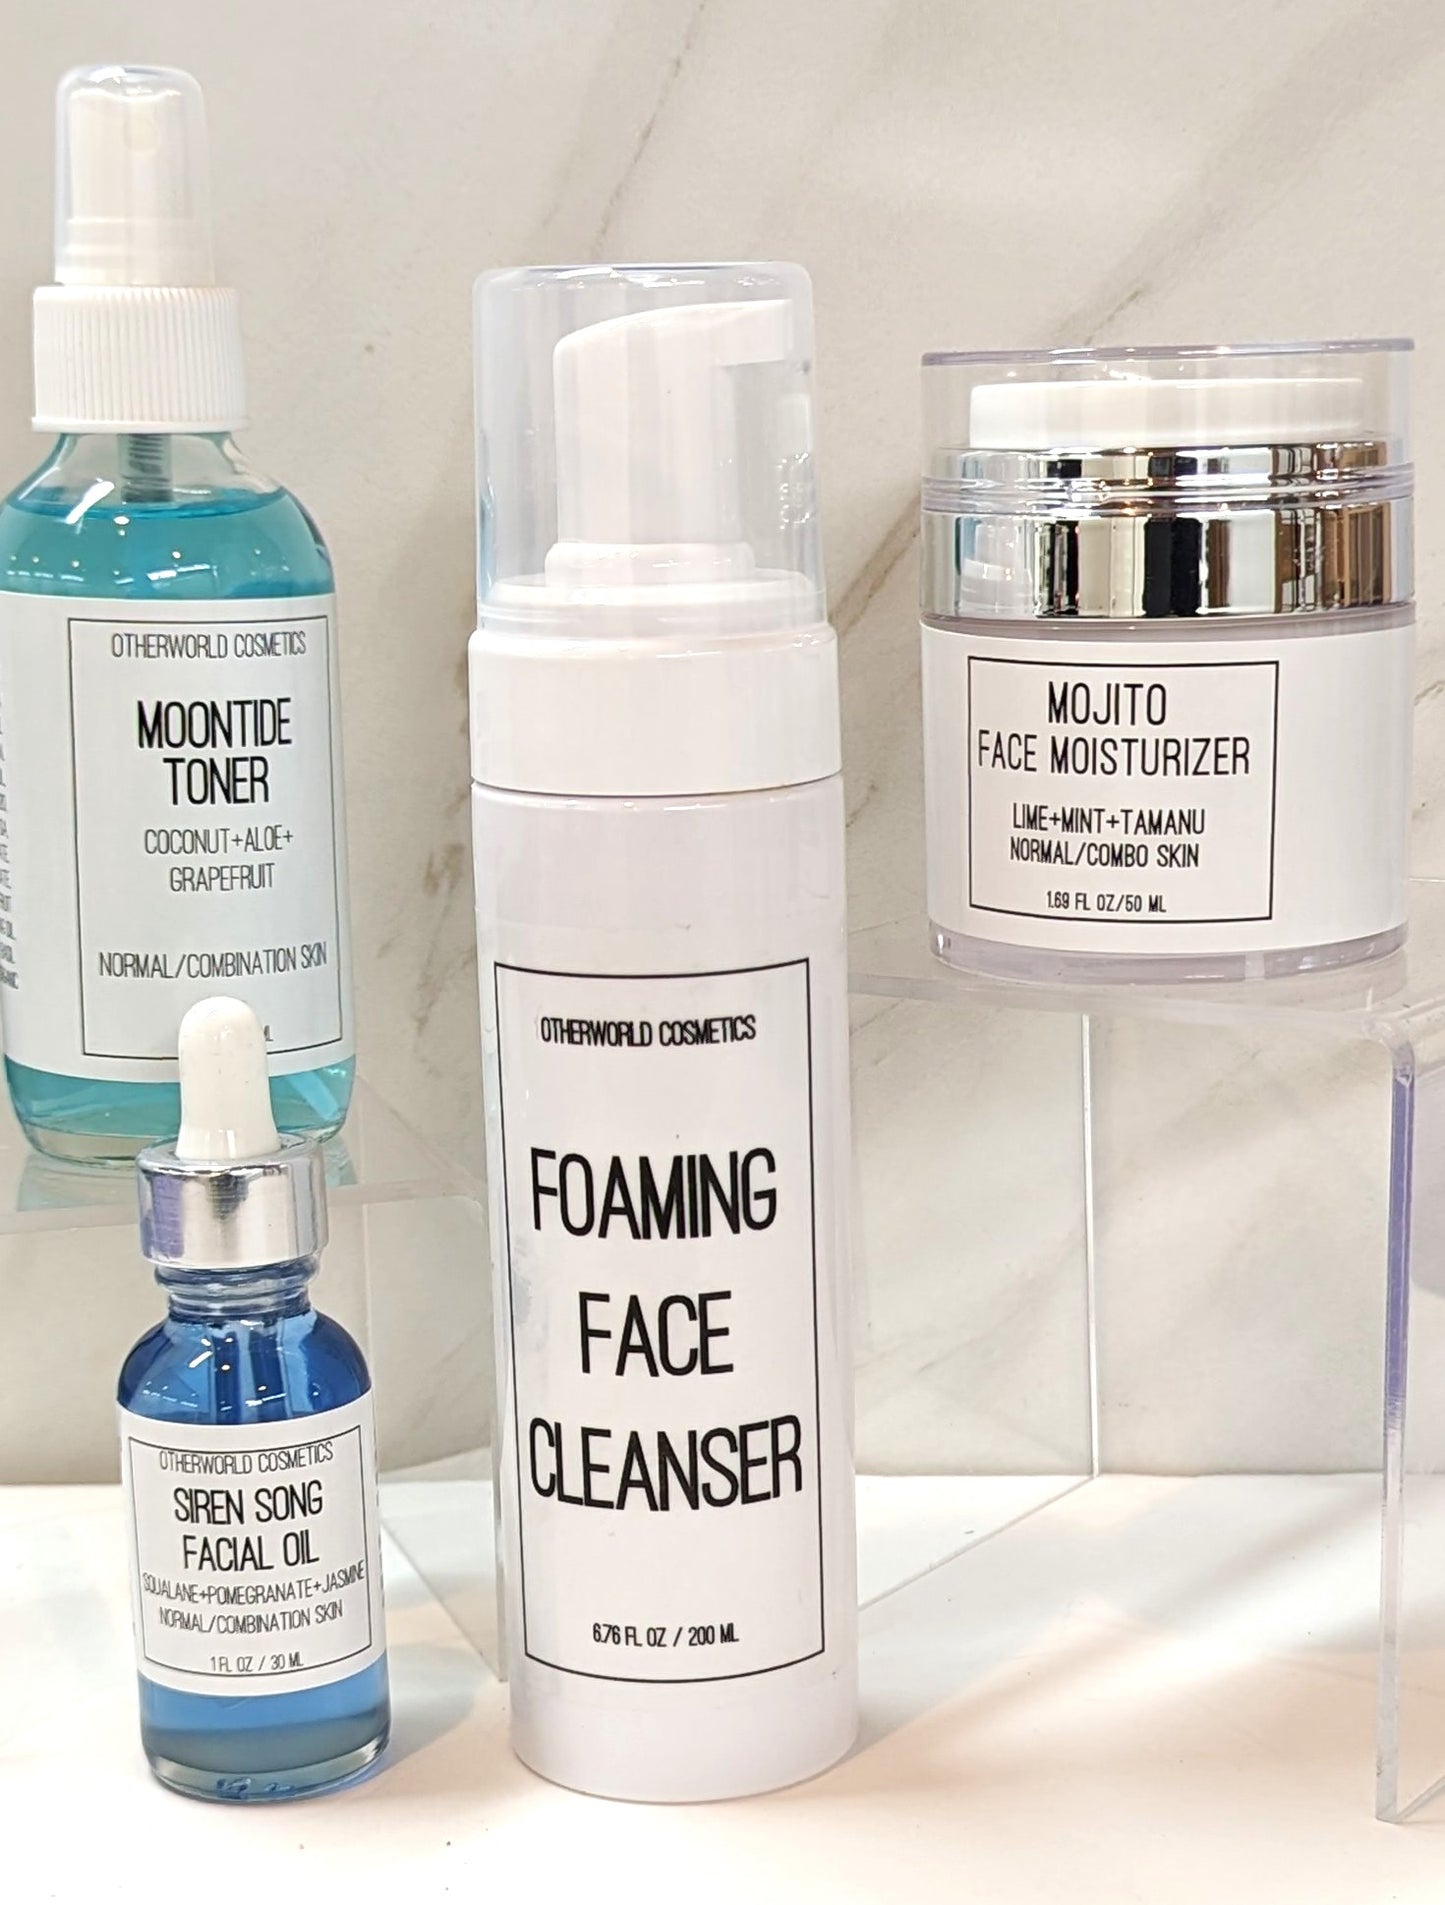 Normal/Combo Skin Care Set (4-in-1)